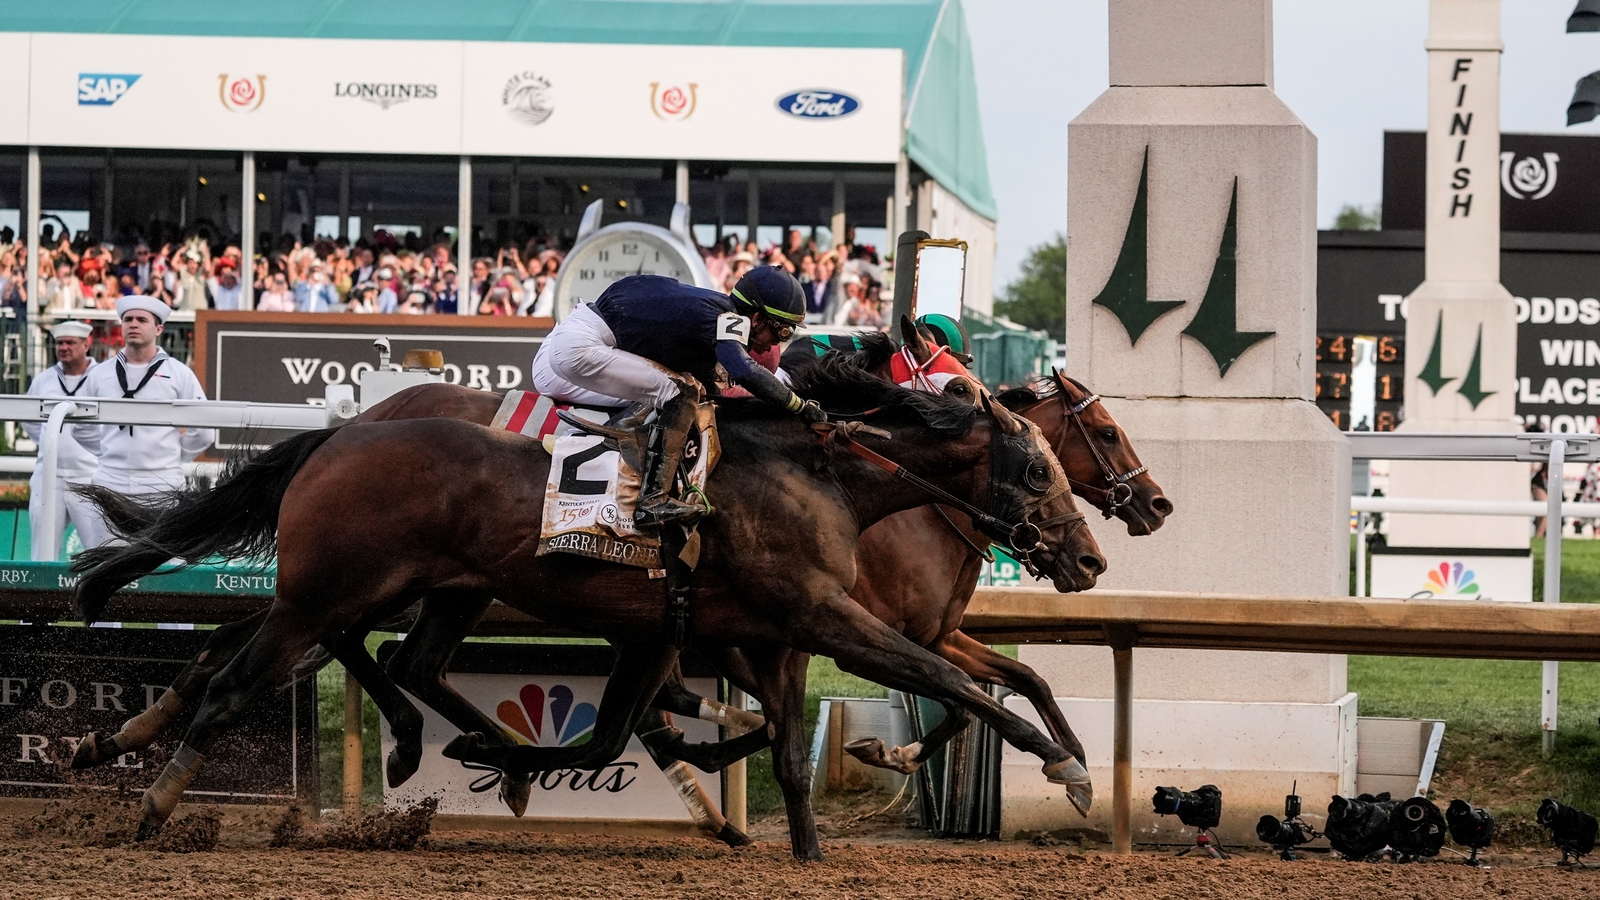 mystik-dan-wins-150th-kentucky-derby-by-a-nose-in-3-horse-photo-finish-at-churchill-downs